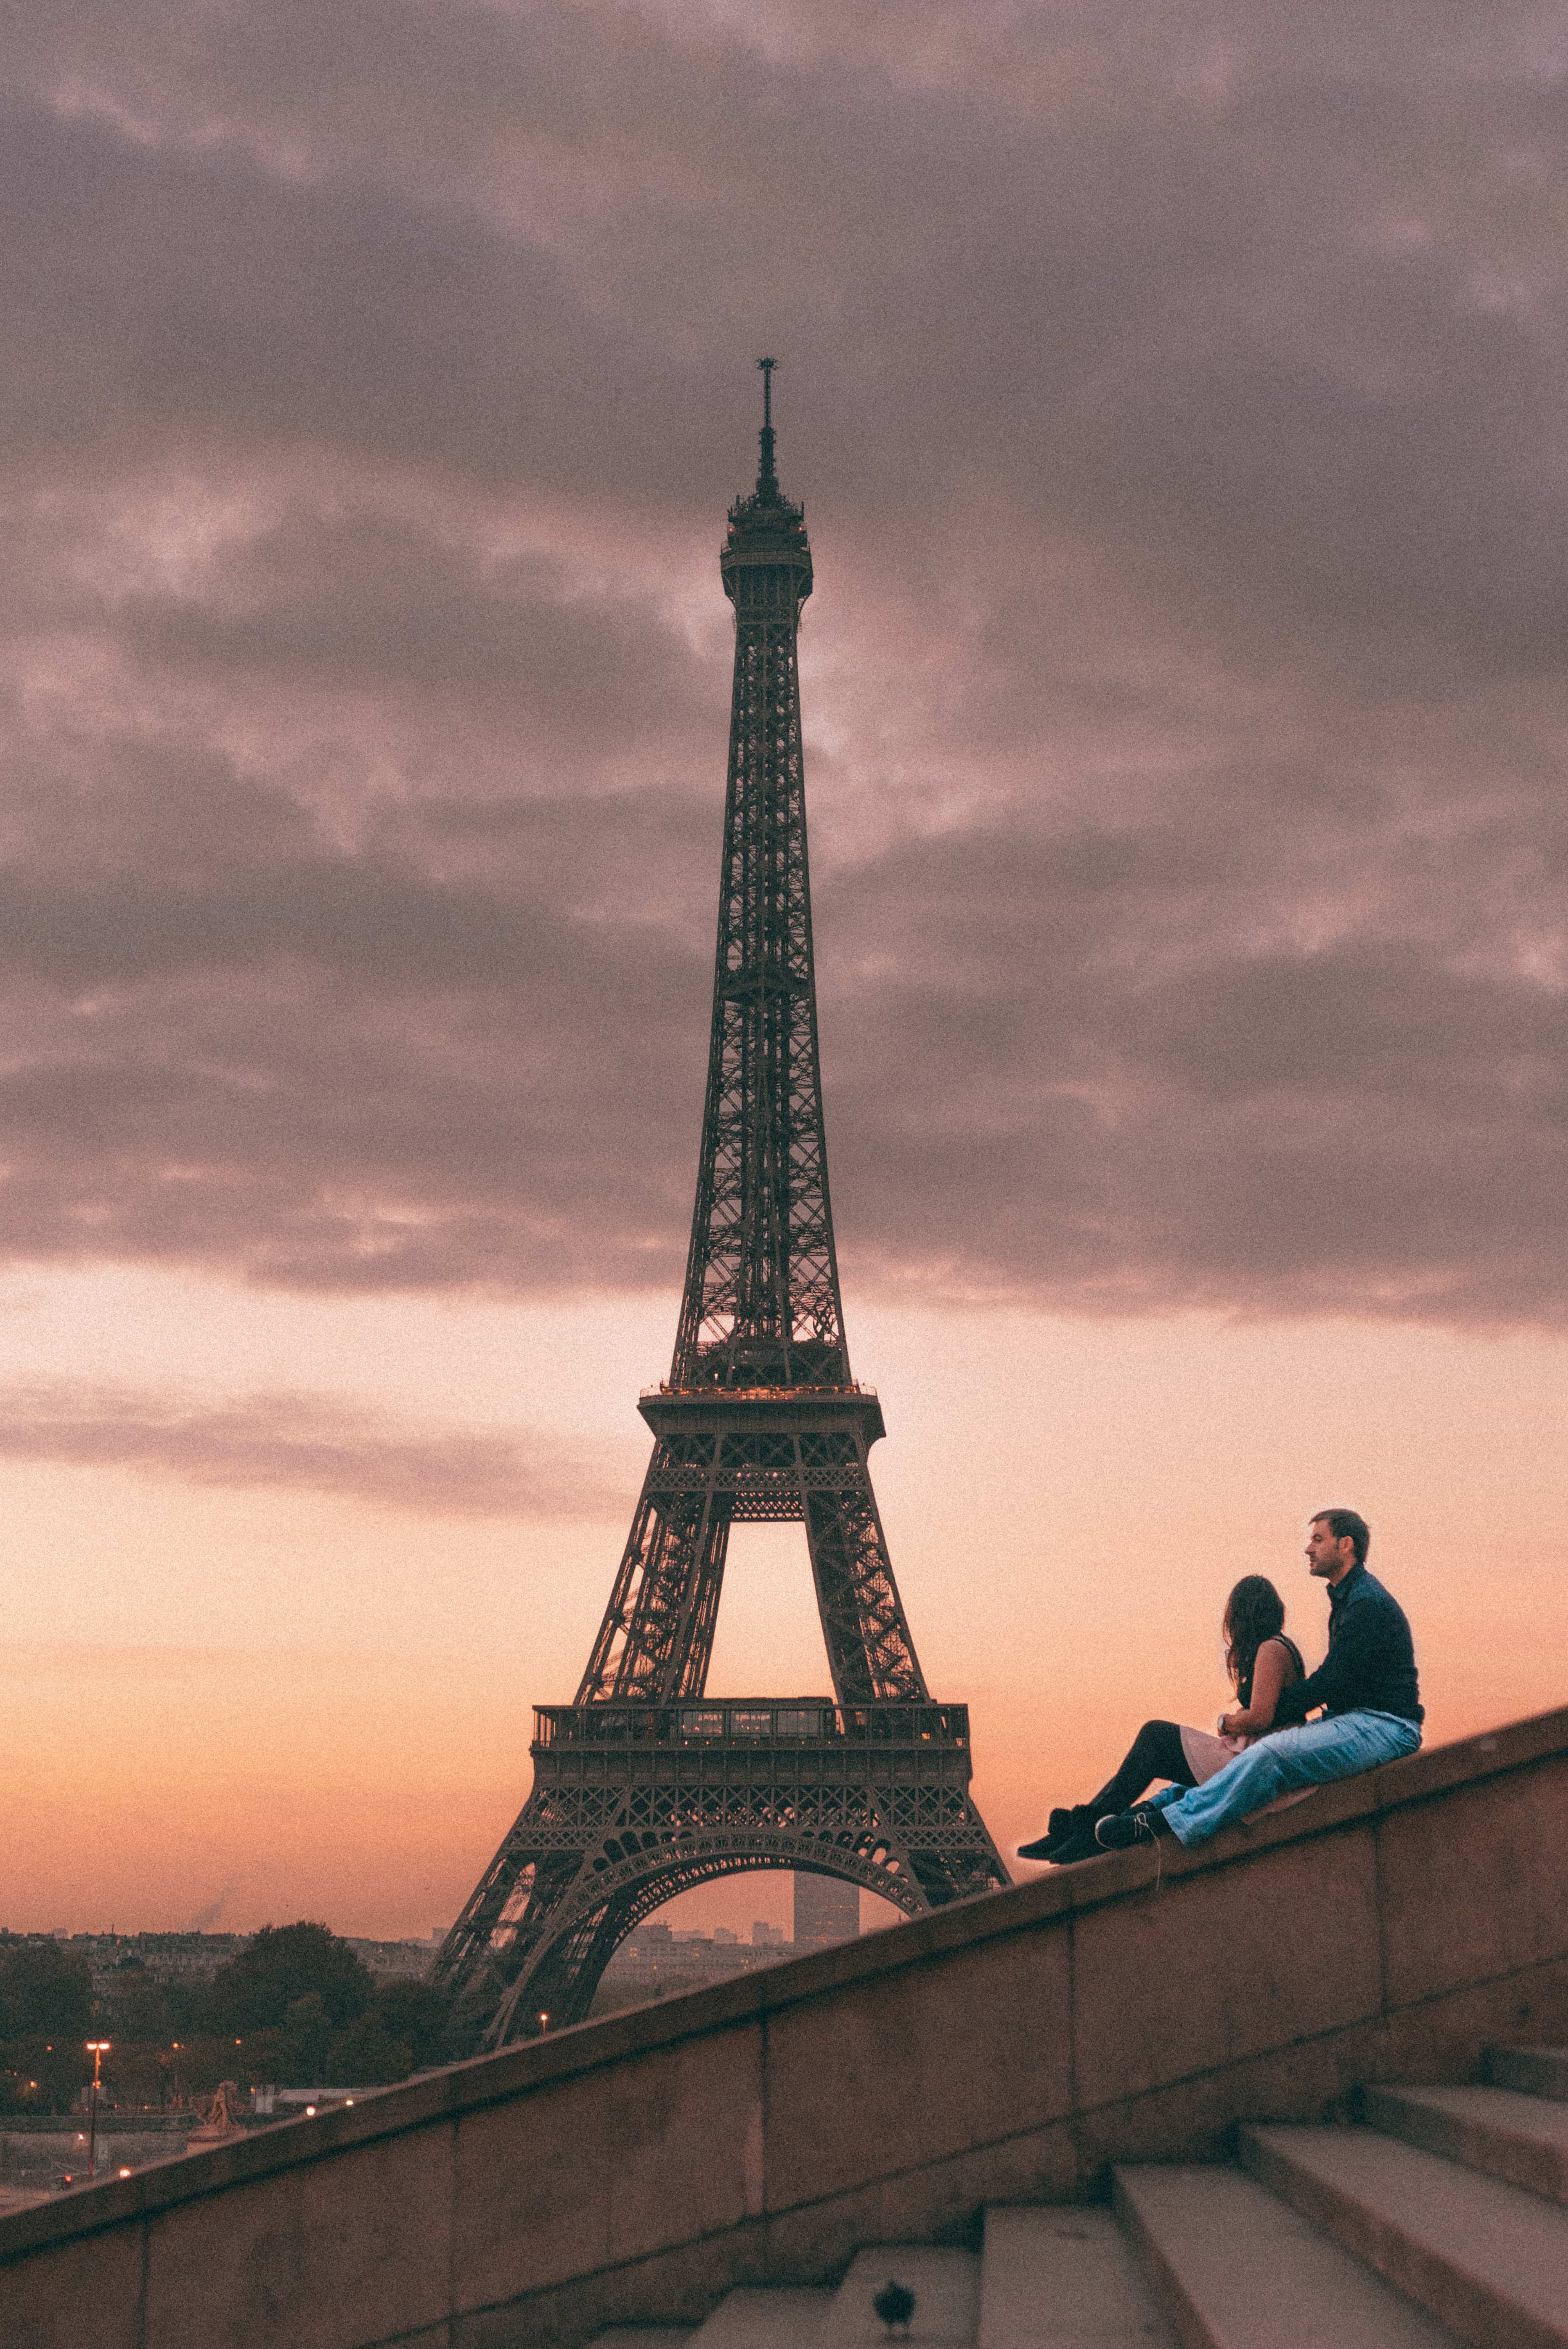 Eiffel Tower, Thrifty Tips for Booking a Short Break This Winter